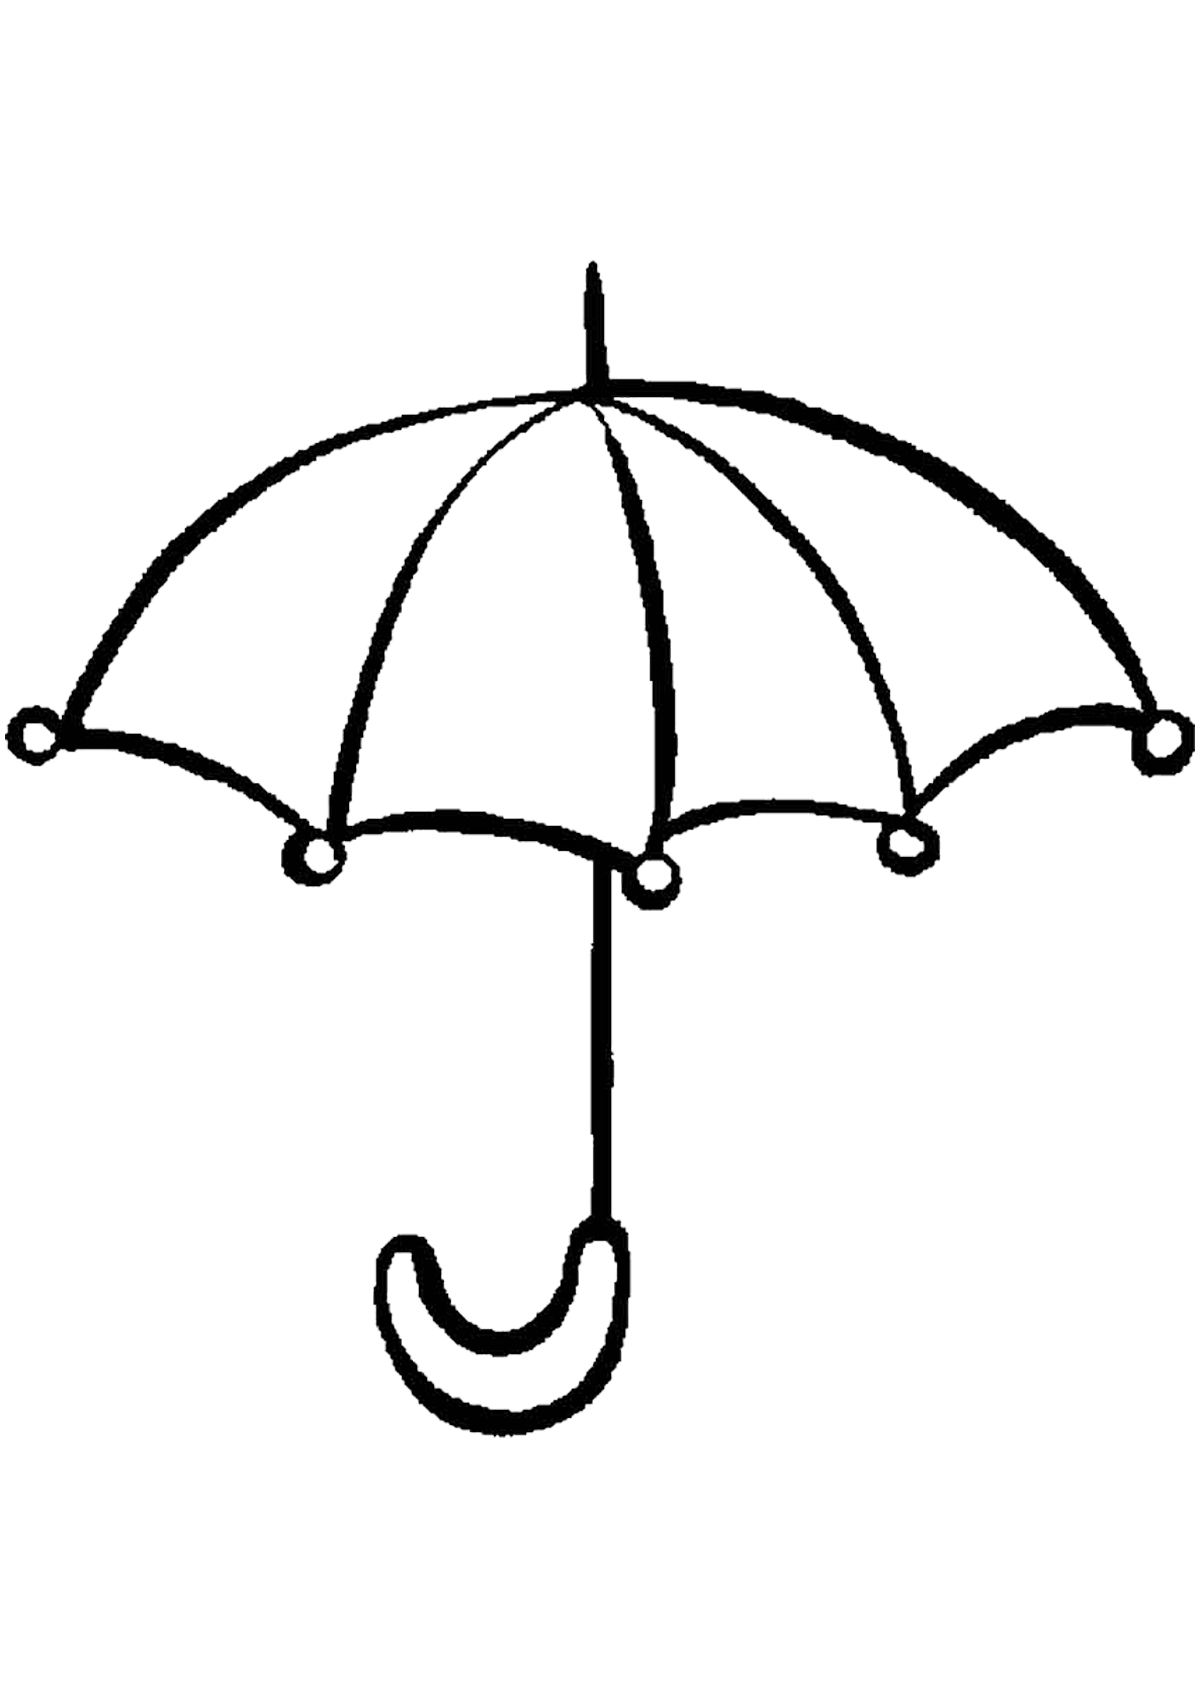 Download Umbrella Coloring Pages for childrens printable for free